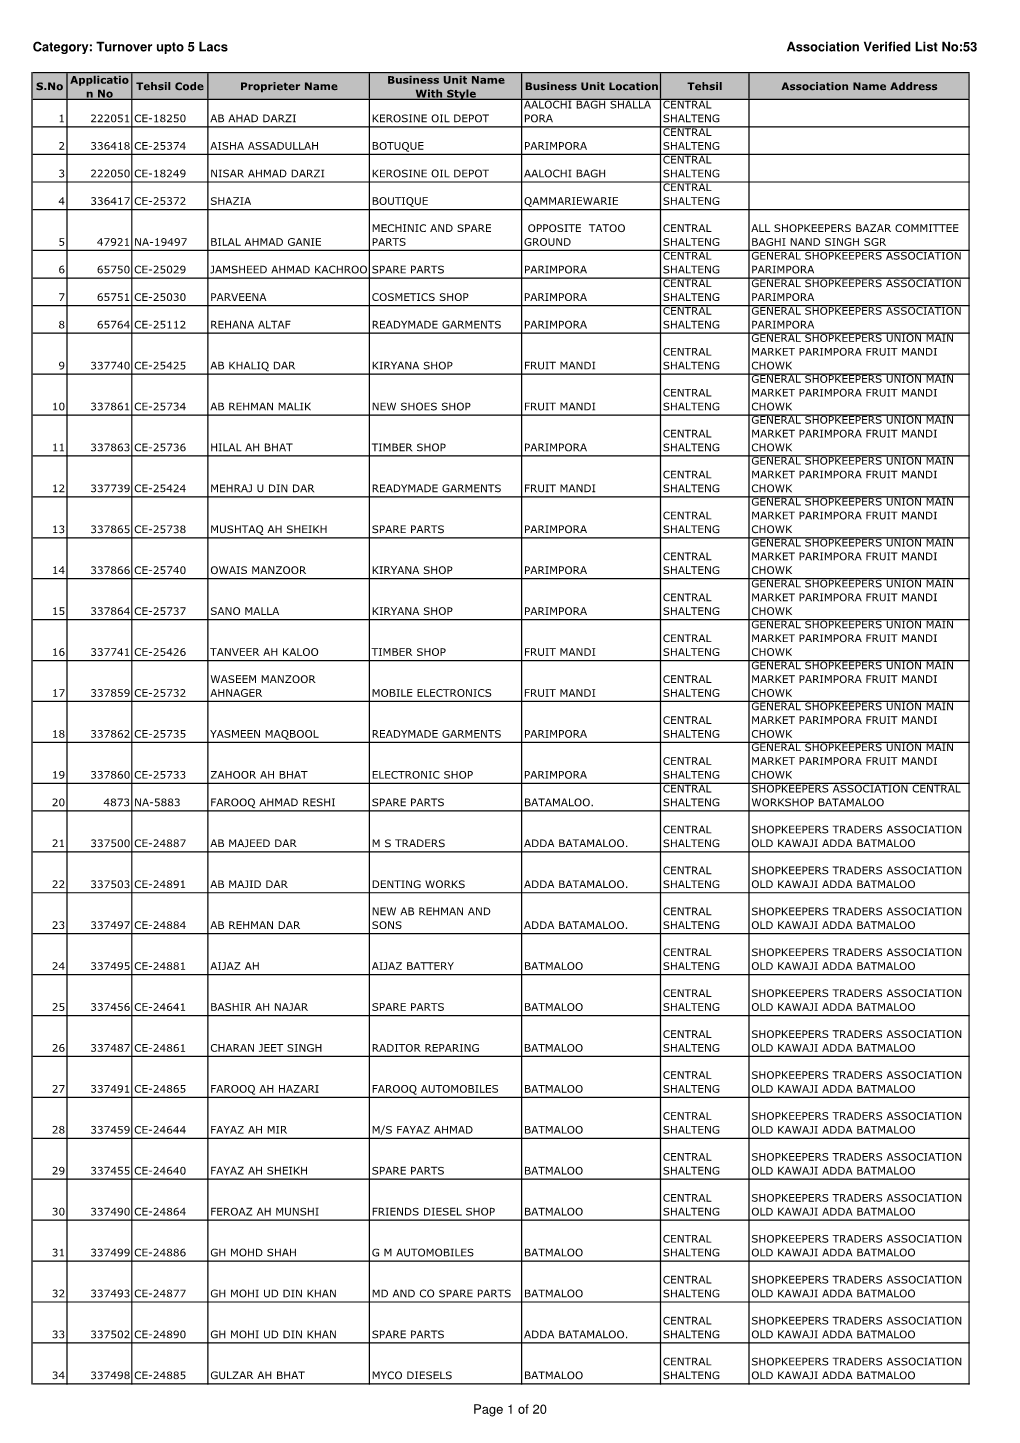 Category: Turnover Upto 5 Lacs Association Verified List No:53 Page 1 of 20